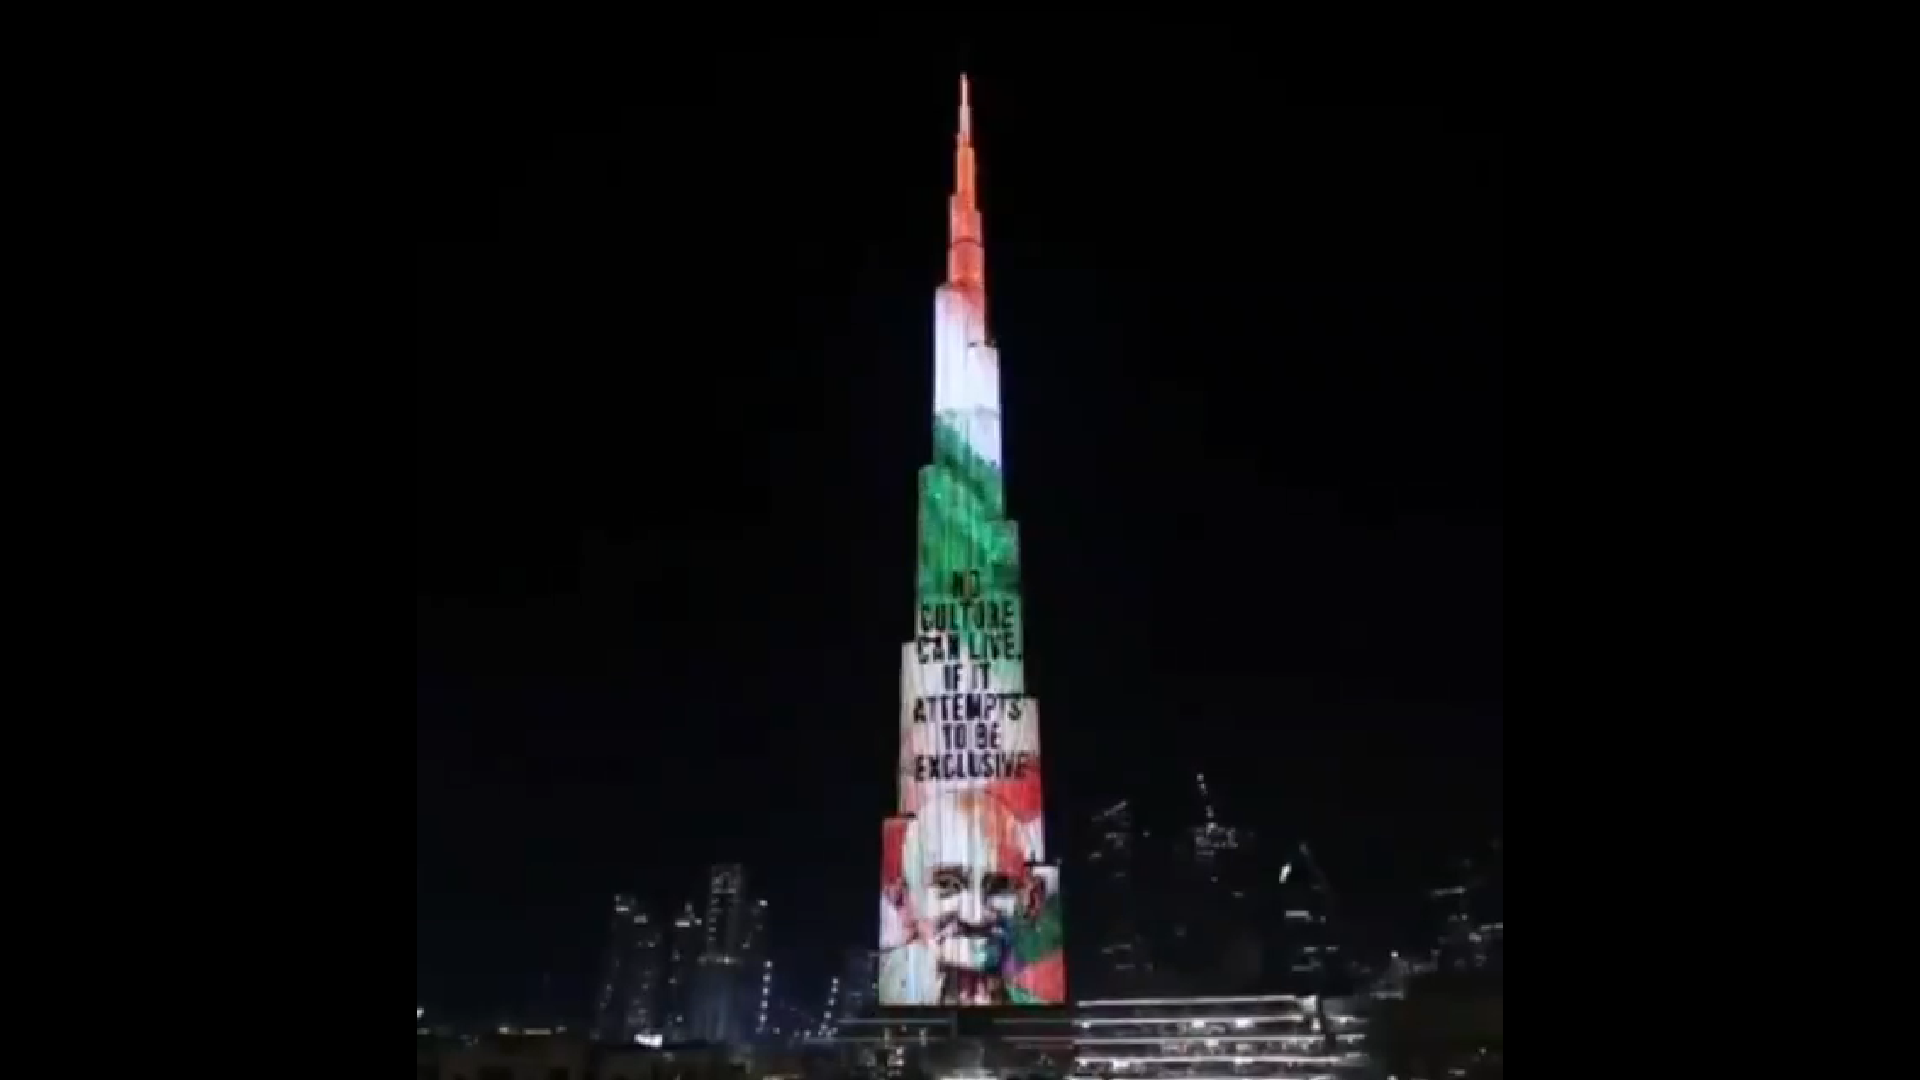 Art installation on the facade of the world's tallest building in honor of Mahatma Ghandi